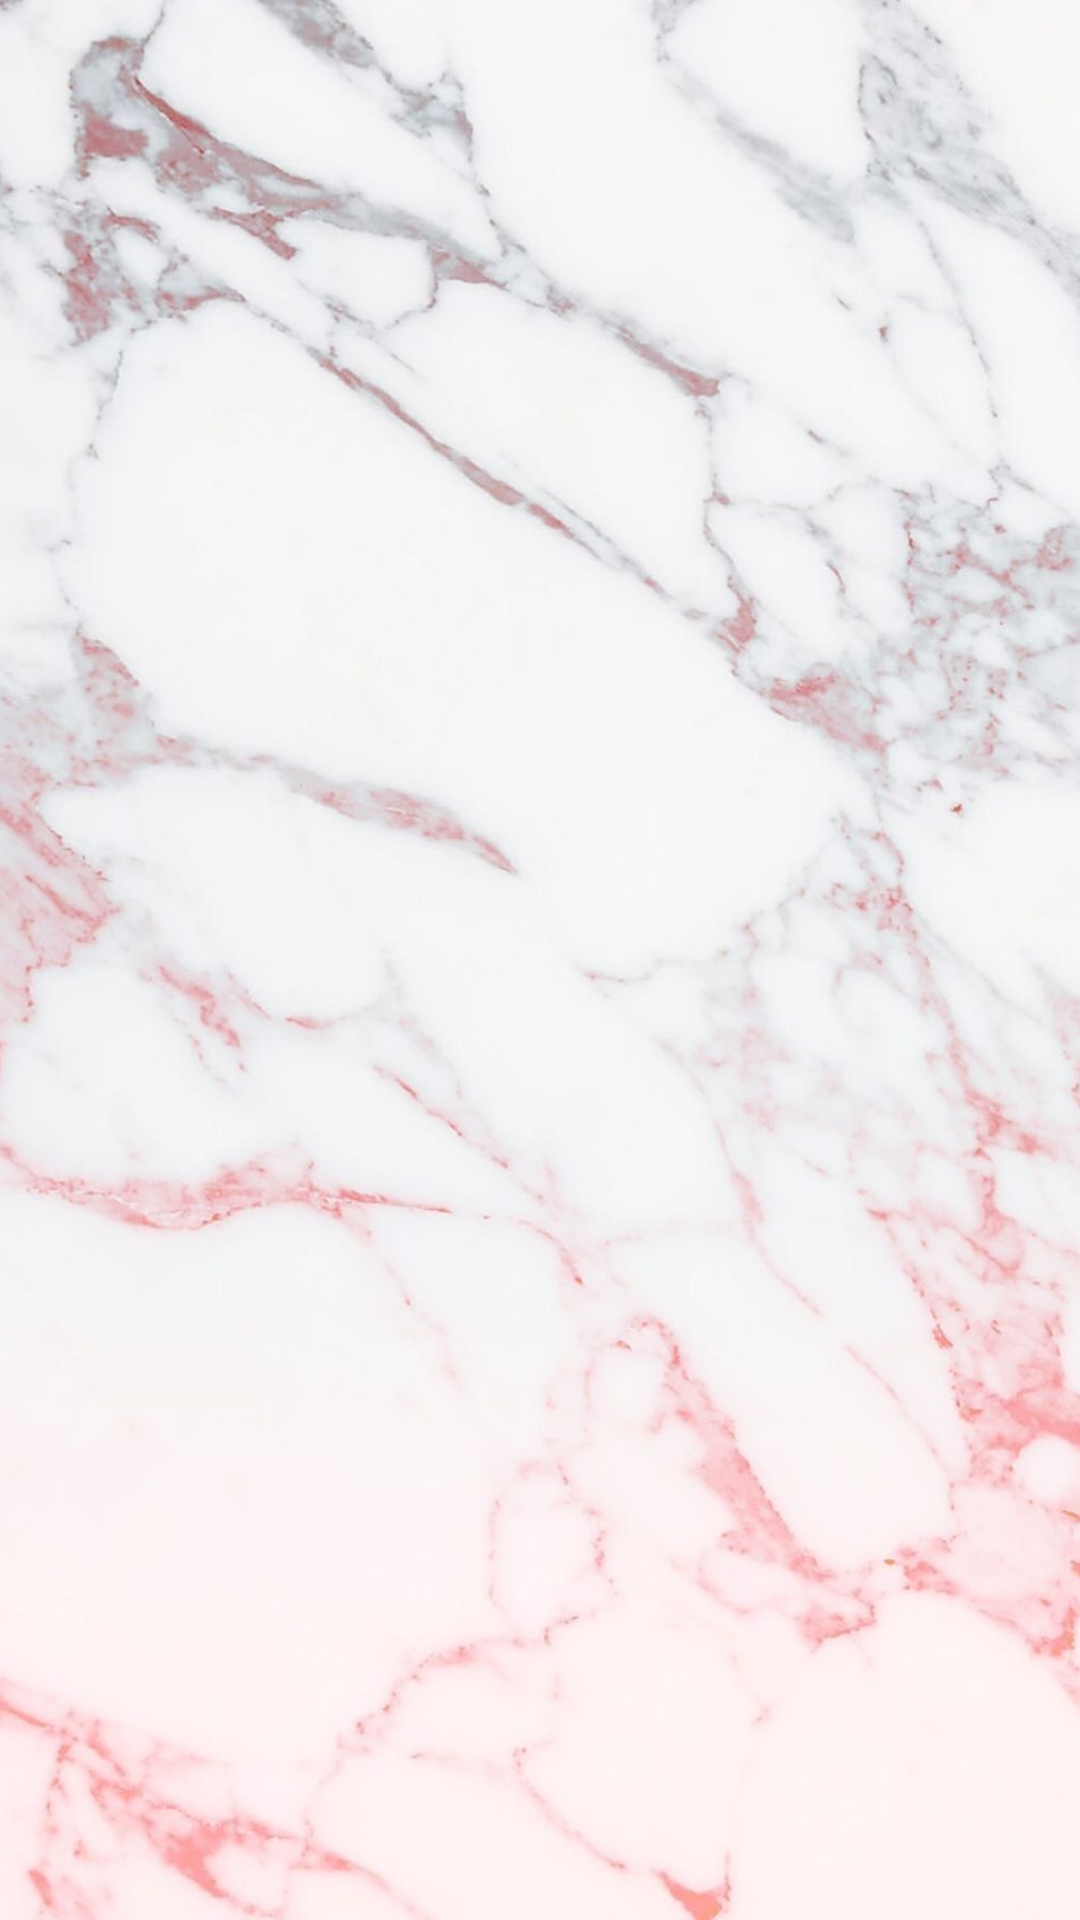 Marble elegance, Nikki's marble creations, iPhone exclusive, Stylish phone background, 1080x1920 Full HD Phone